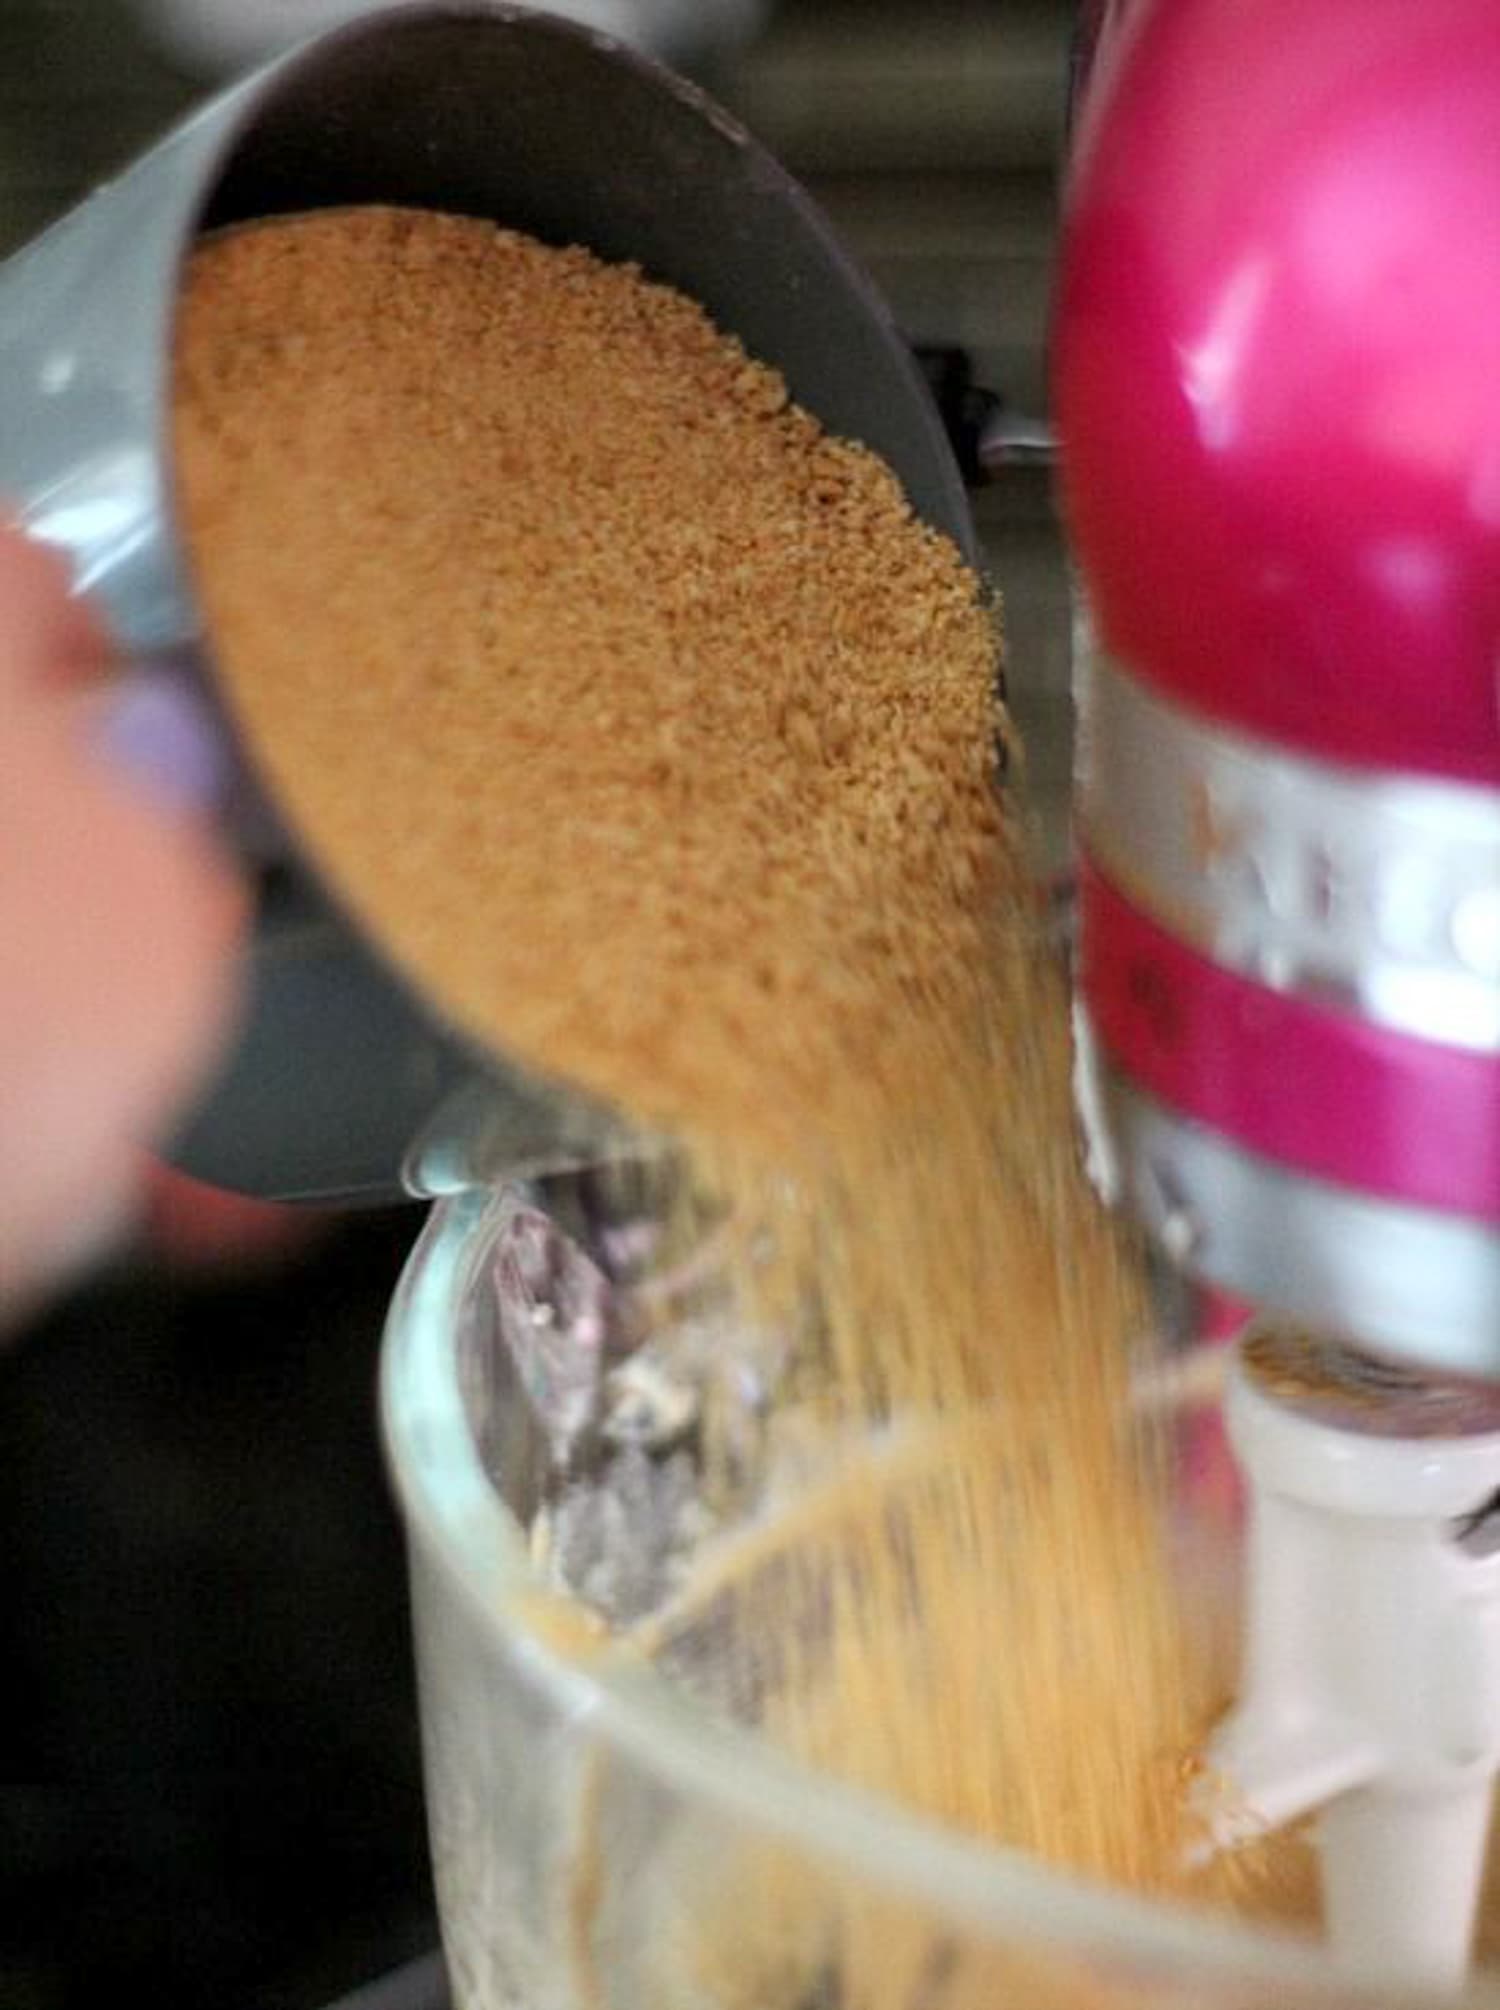 pouring graham cracker crumbs into the mixing bowl of a stand mixer